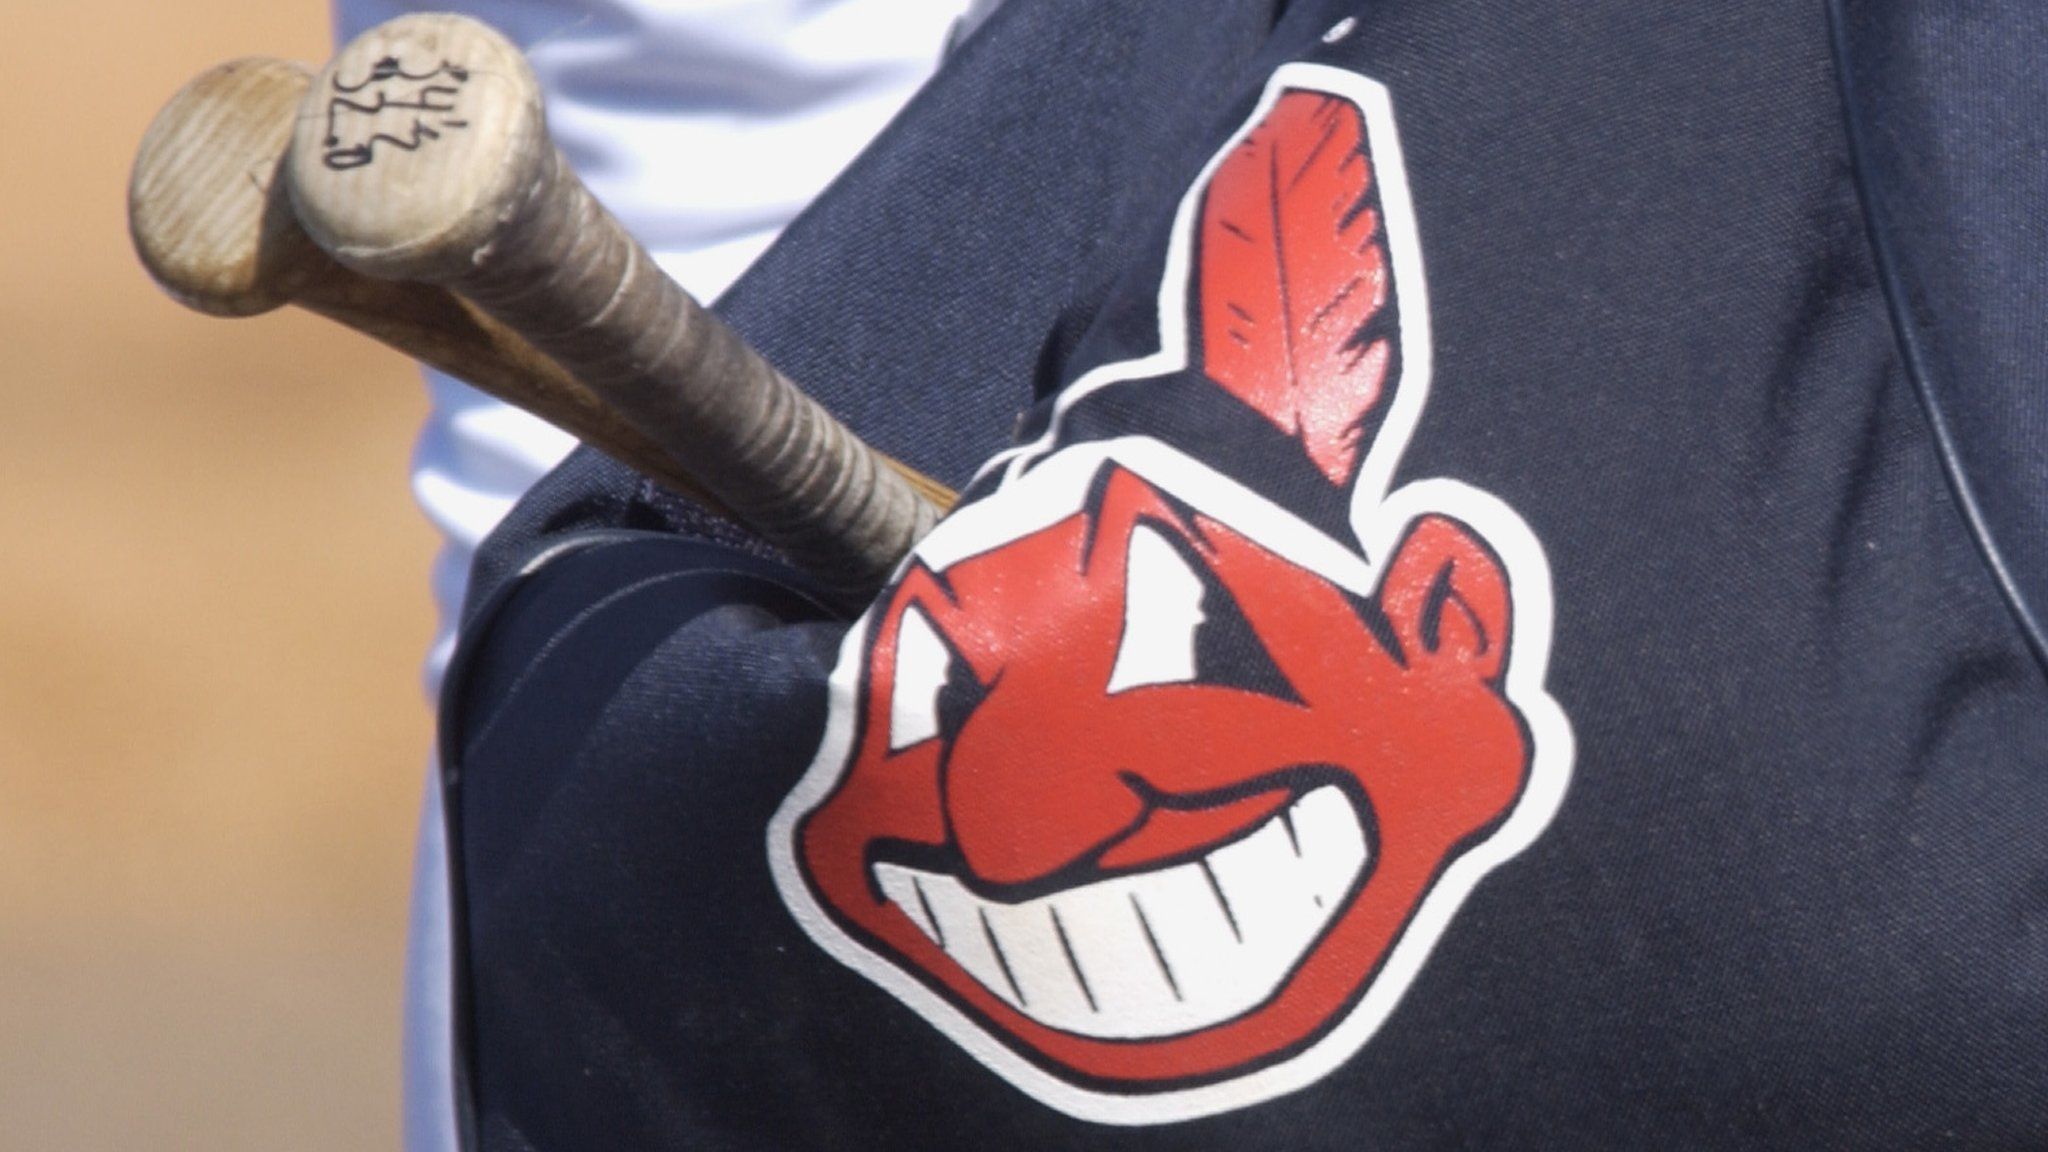 The Cleveland Indians Chief Wahoo logo on a bag